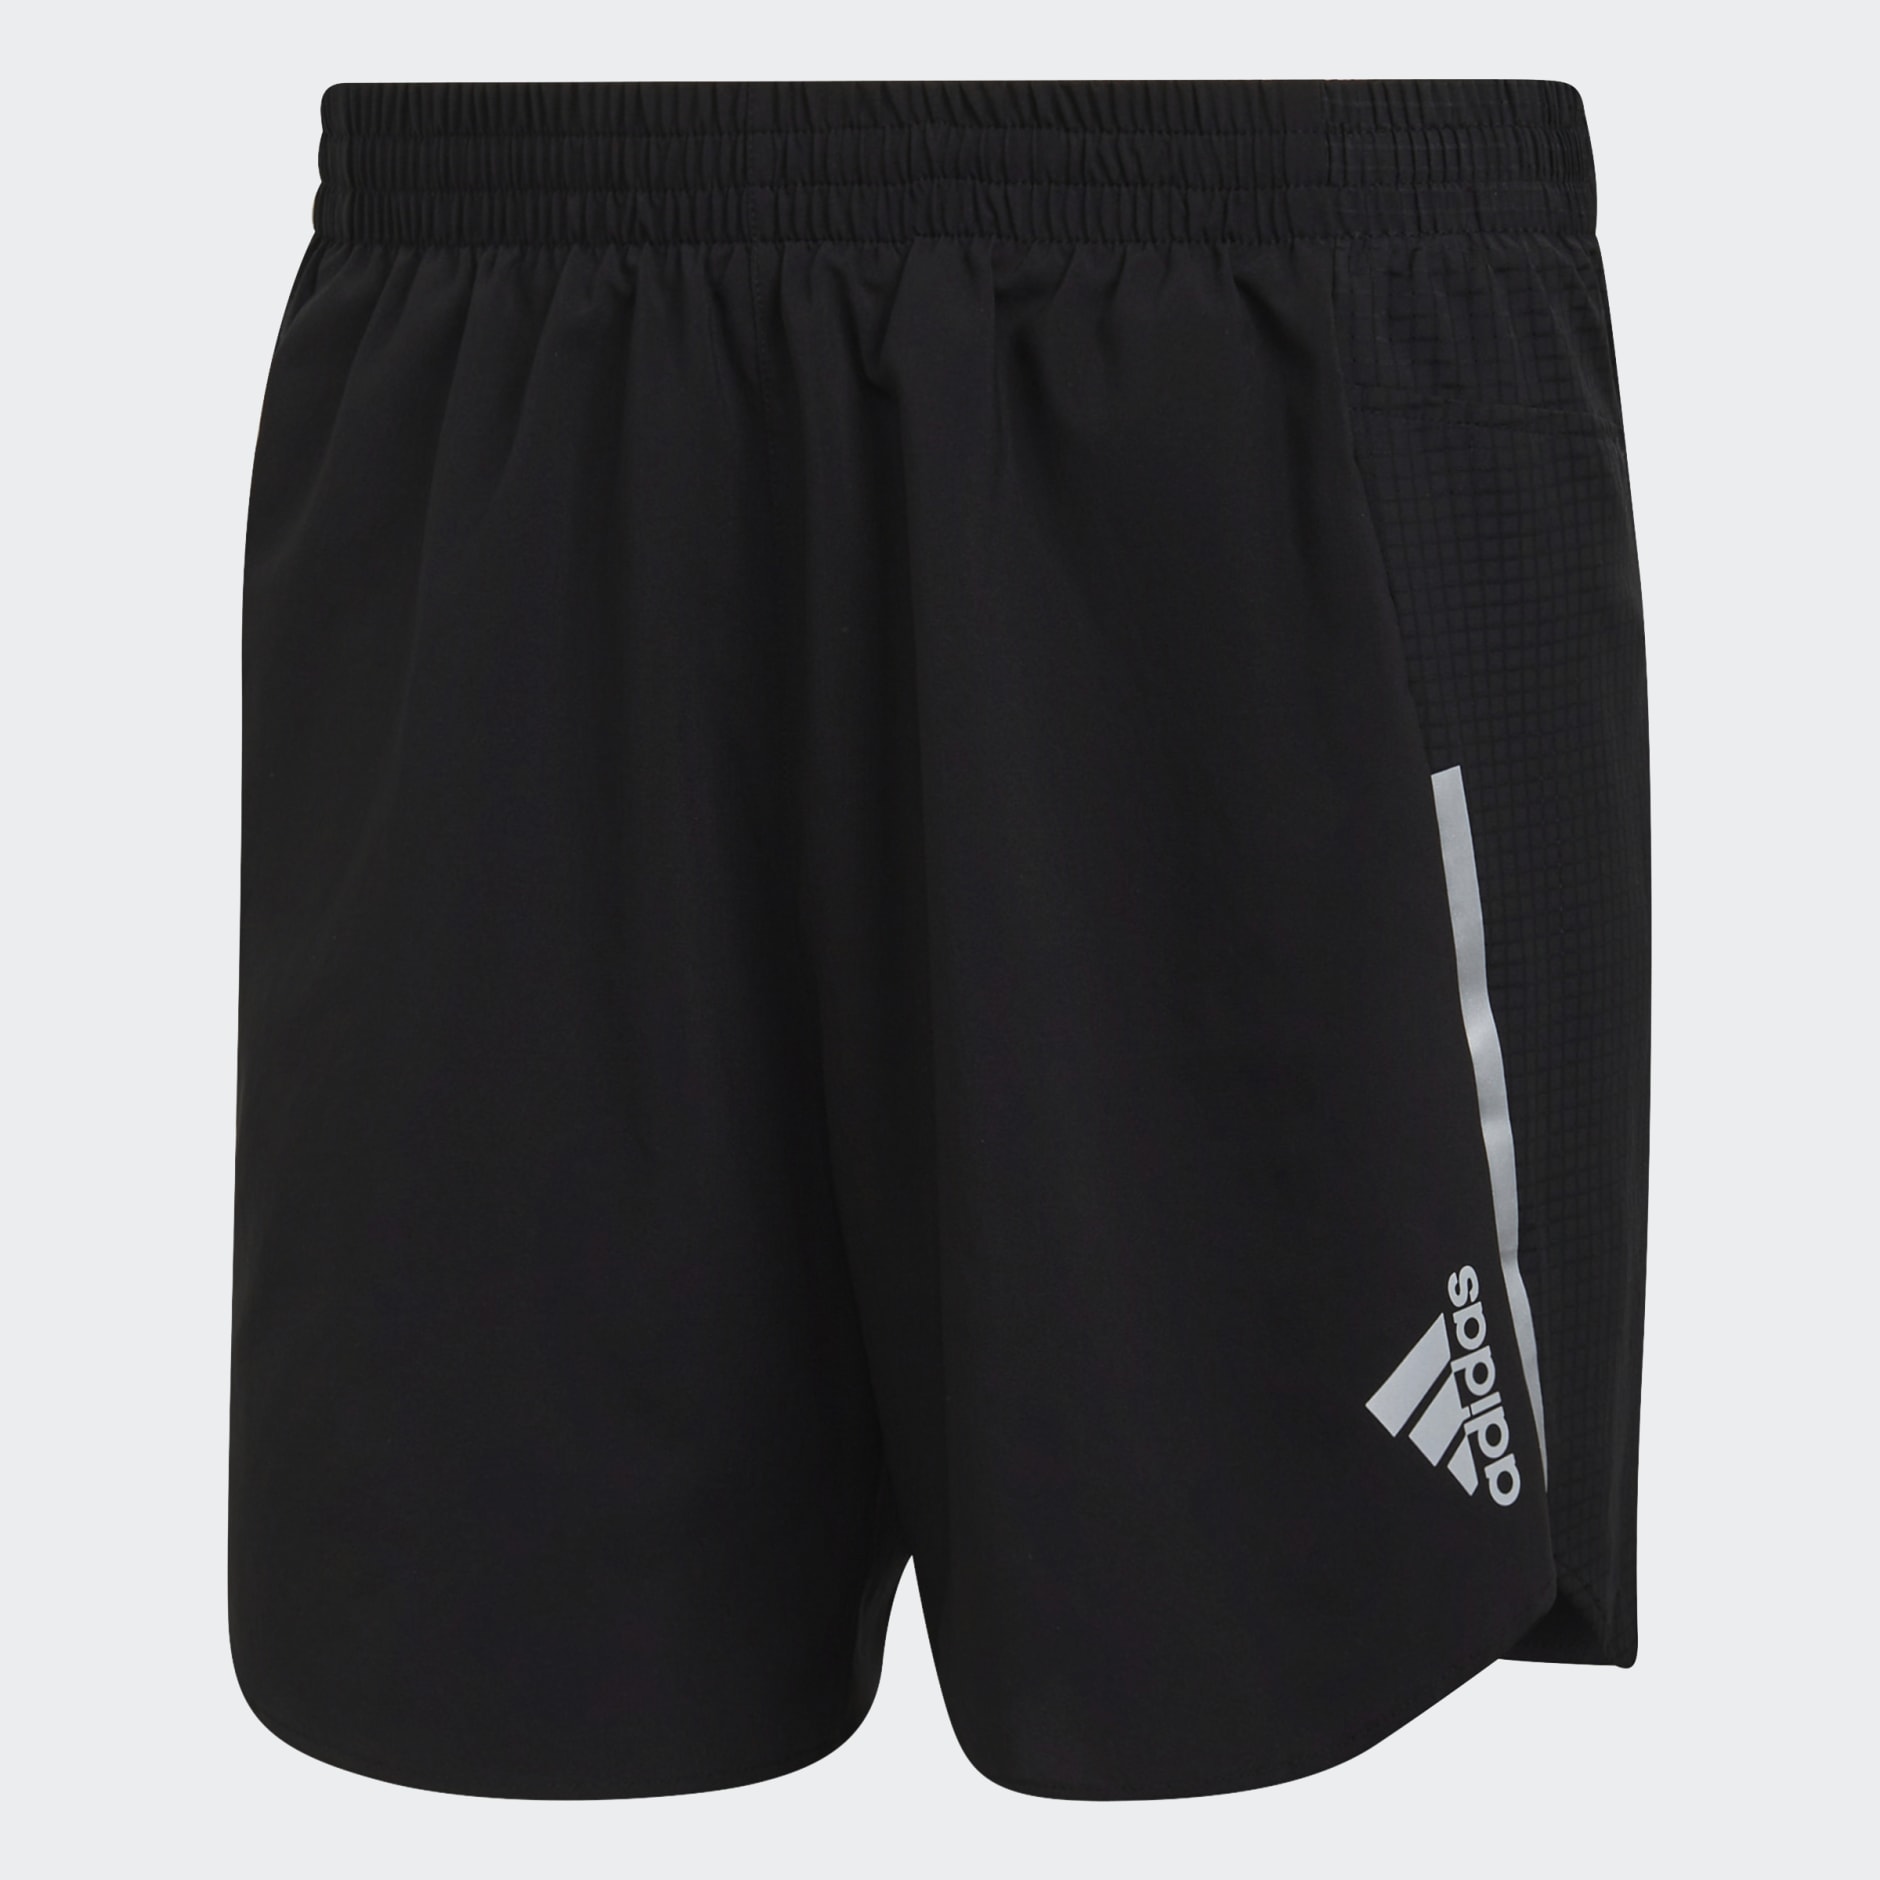 adidas Running shorts and bra with print in black